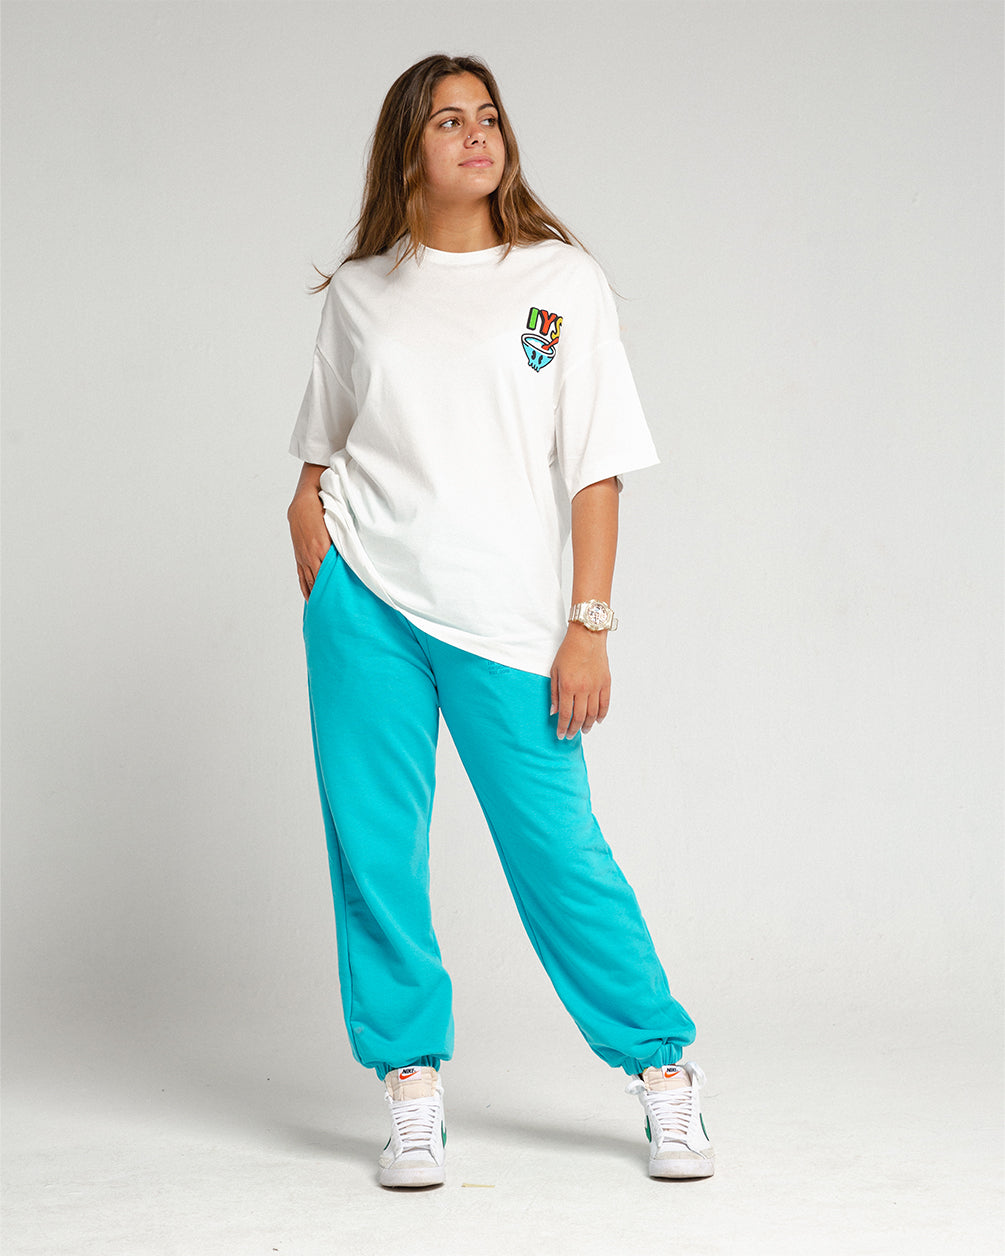 Turquoise Swants (Sweatpants) Swants IN YOUR SHOE S 